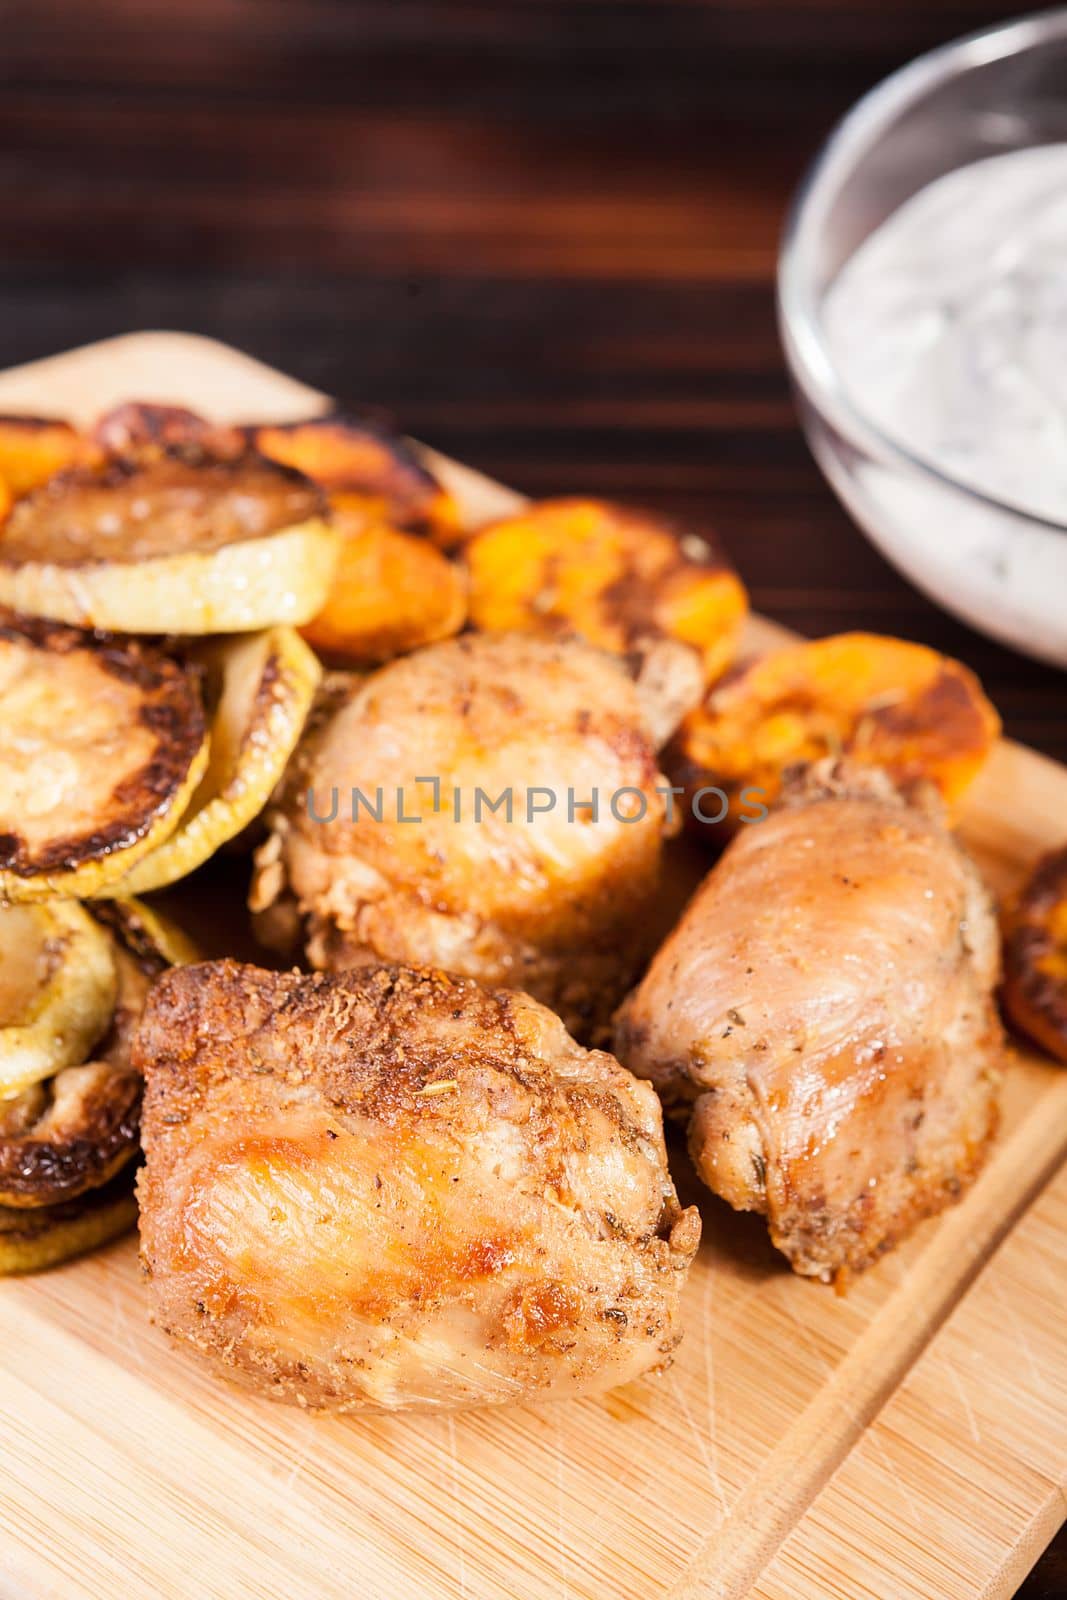 Healthy and delicious dinner made of fried chicken and grilled vegetables on wooden plate